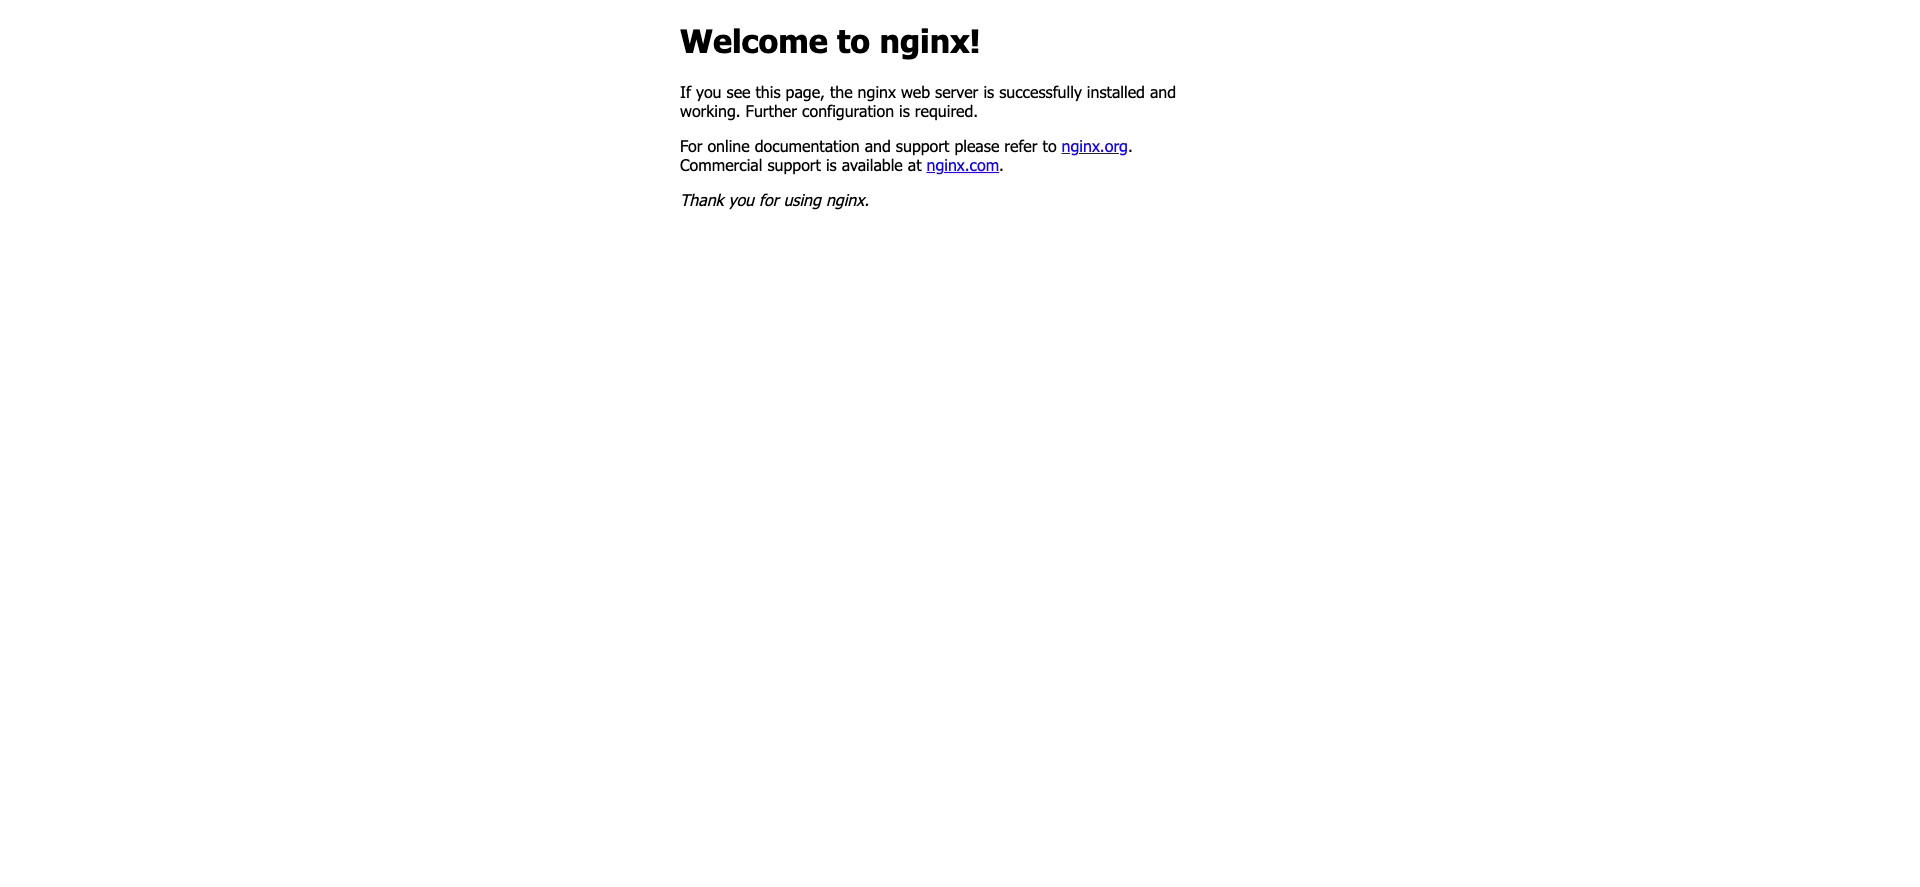 NGINX welcome screen